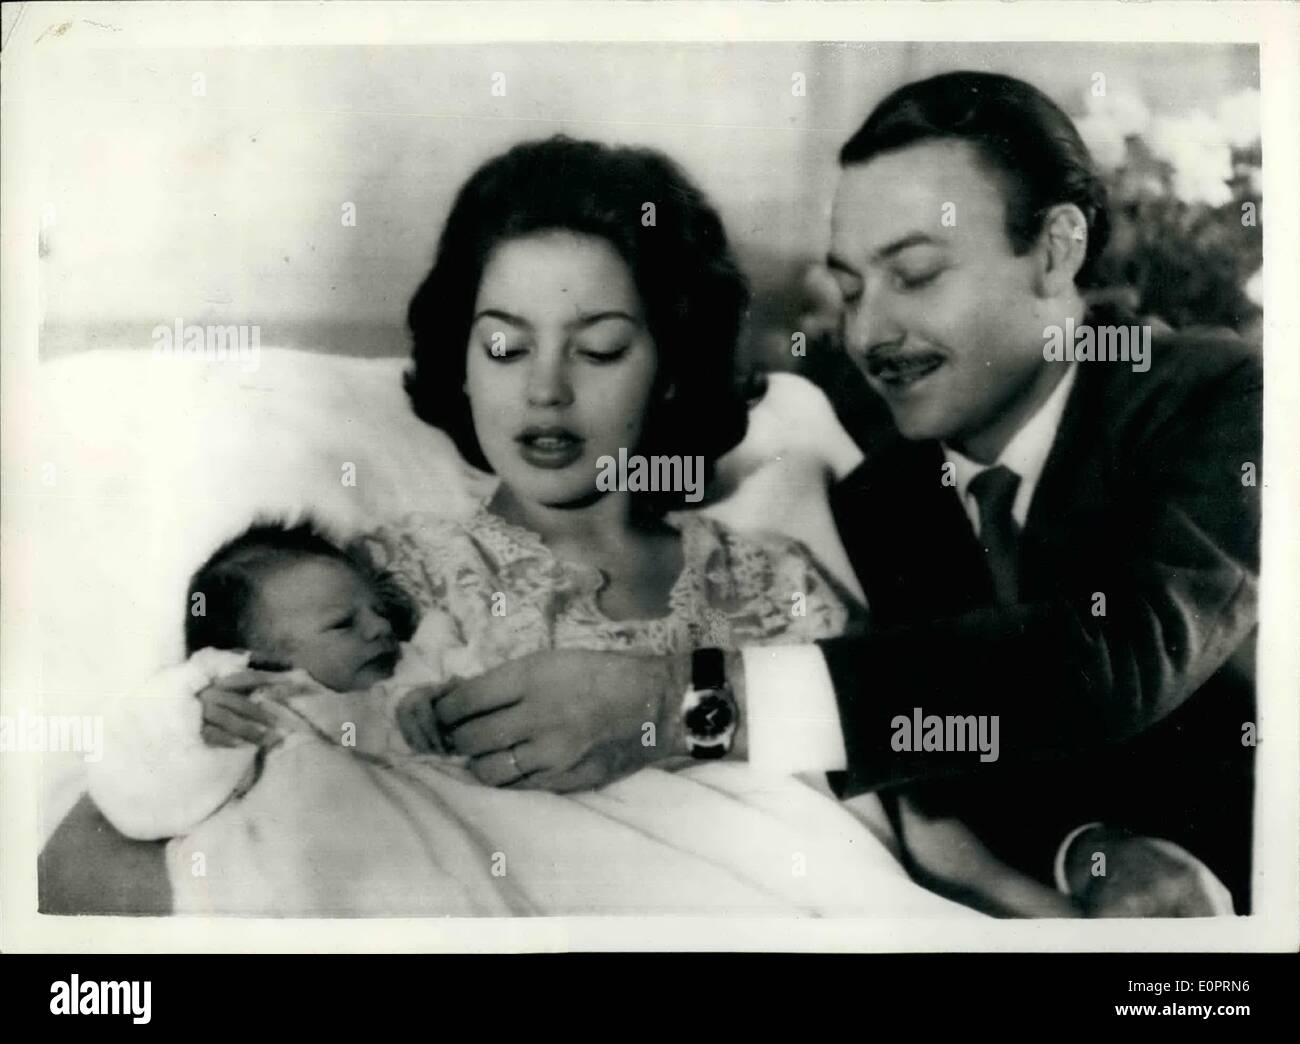 Nov. 11, 1956 - Son For Princess Ira; Princess Ira of Hohenlohe yesterday gave birth to a baby son, at Lausanne, Switzerland. The baby will be named Christoff Victorio Umberto. Photo Shows Princess Ira and Prince Alfonso with their newly born son, Christoff Victorio Umberto at the Mont-Choisi Clinic, Lausanne. Stock Photo